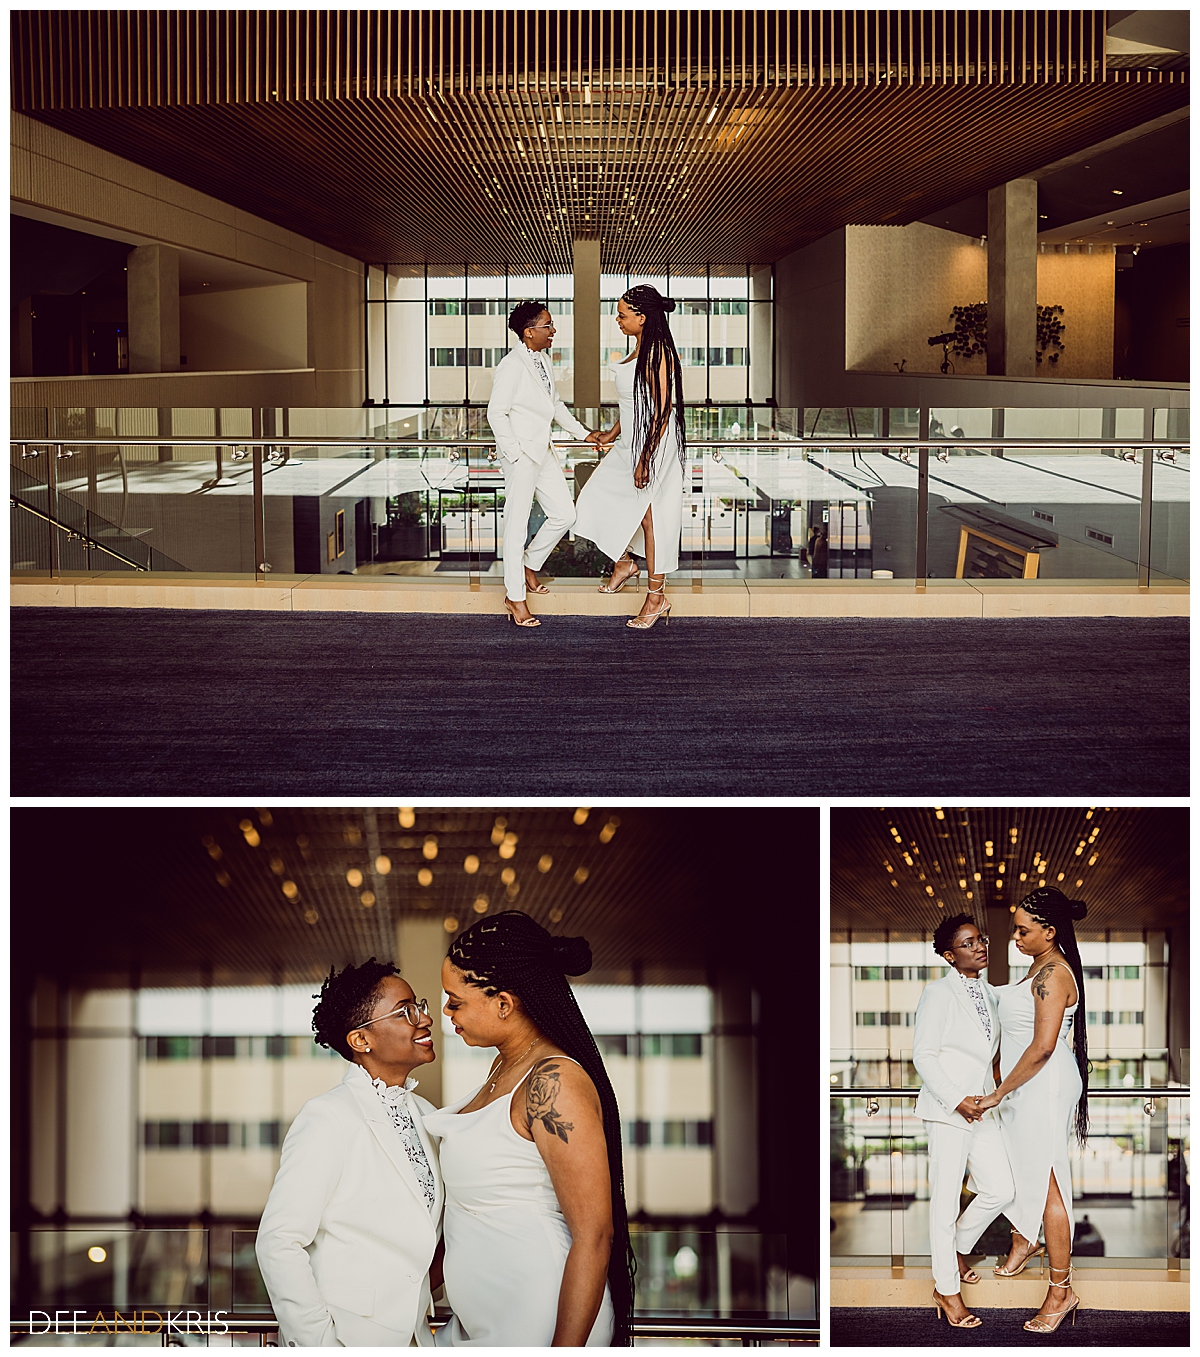 Three images: topo image of couple inside Mix Downtown on upstairs balcony looking at each other. Bottom left image of couple coming in for a kiss. Bottom right image of couple on balcony holding hands.